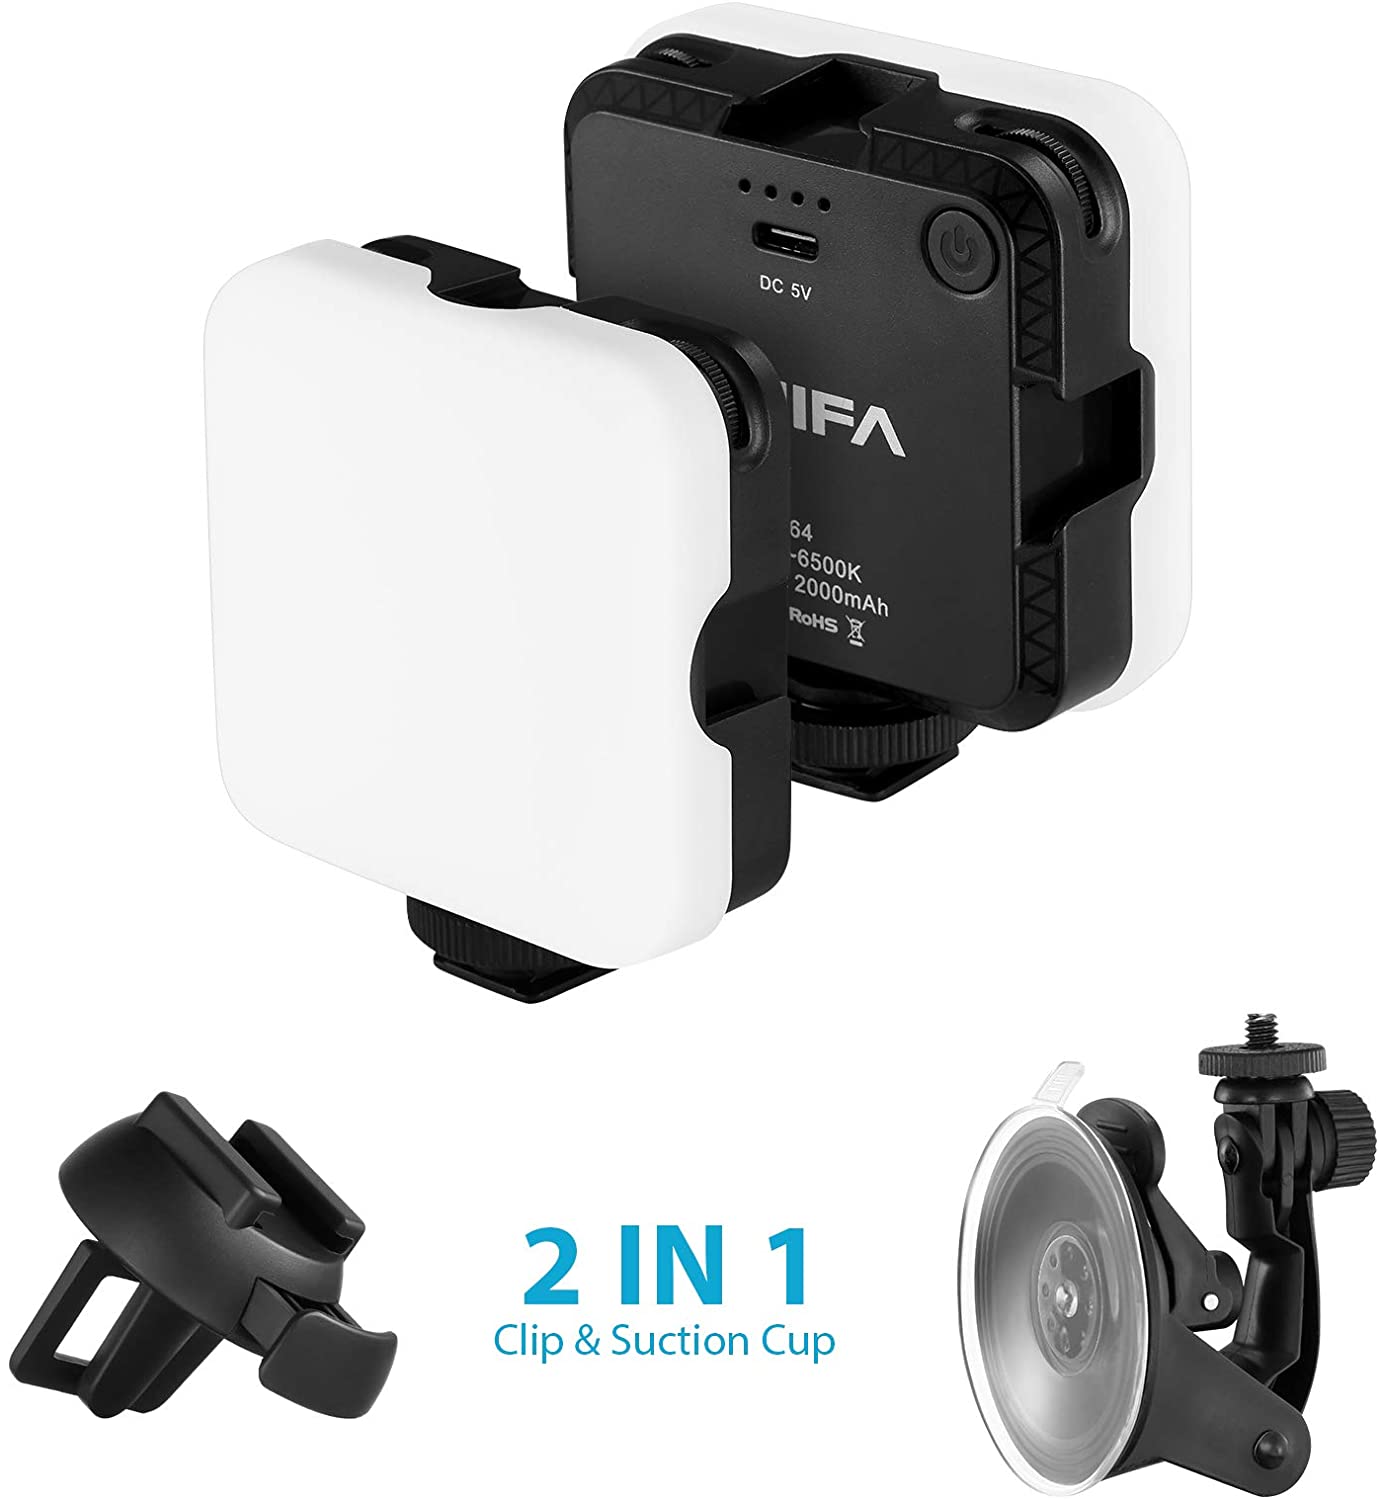 MUIFA Video Conference Lighting Kit - e4cents